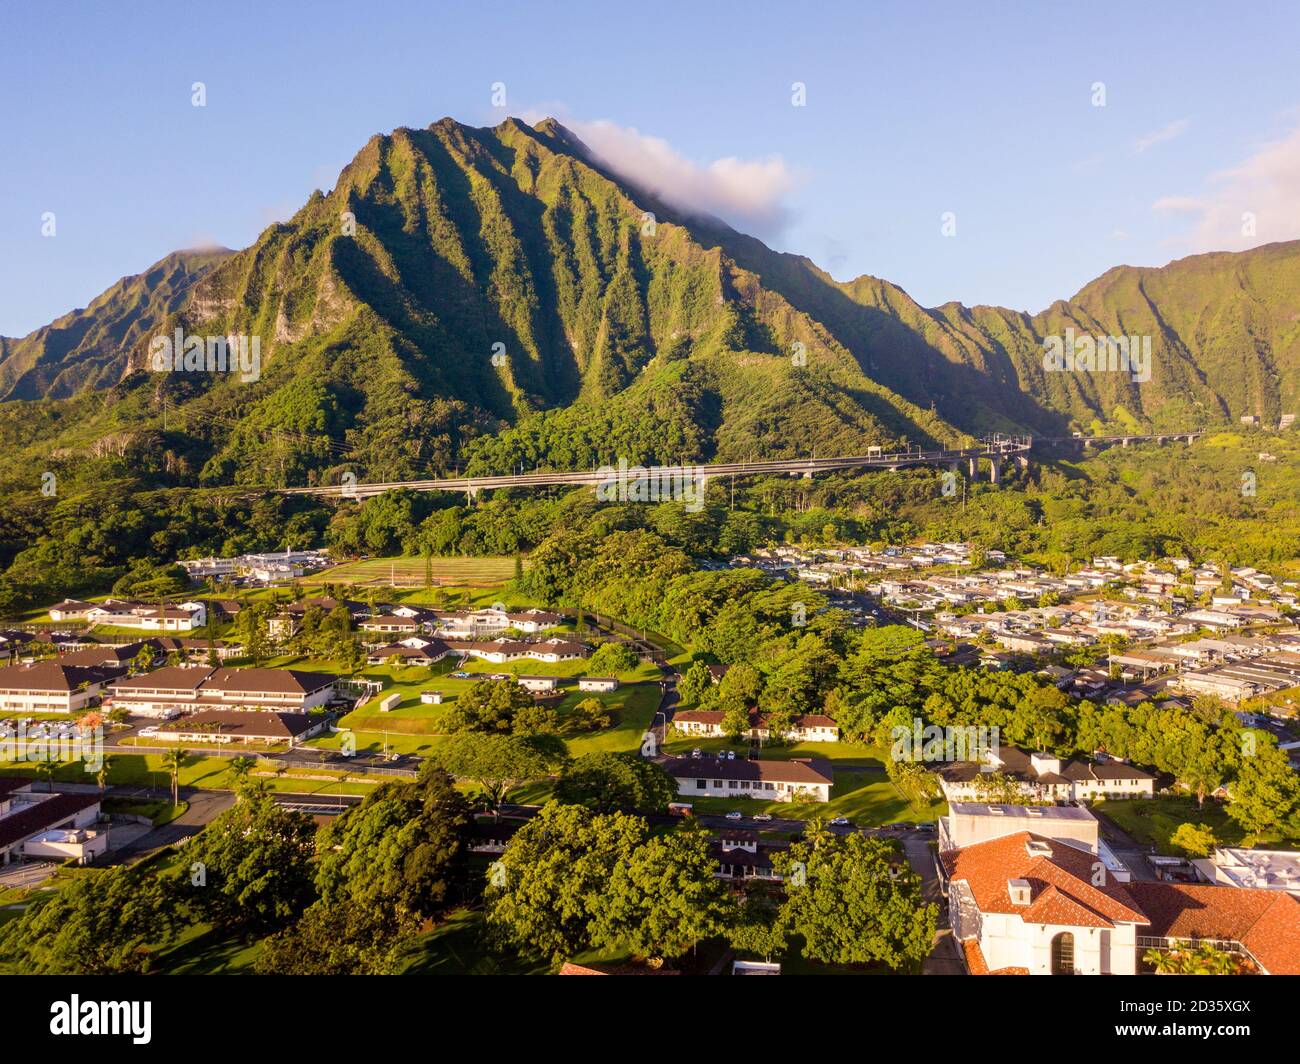 Aerial view of green mountain cliffs and the famous Haiku Stairs in Oahu, Hawaii Stock Photo